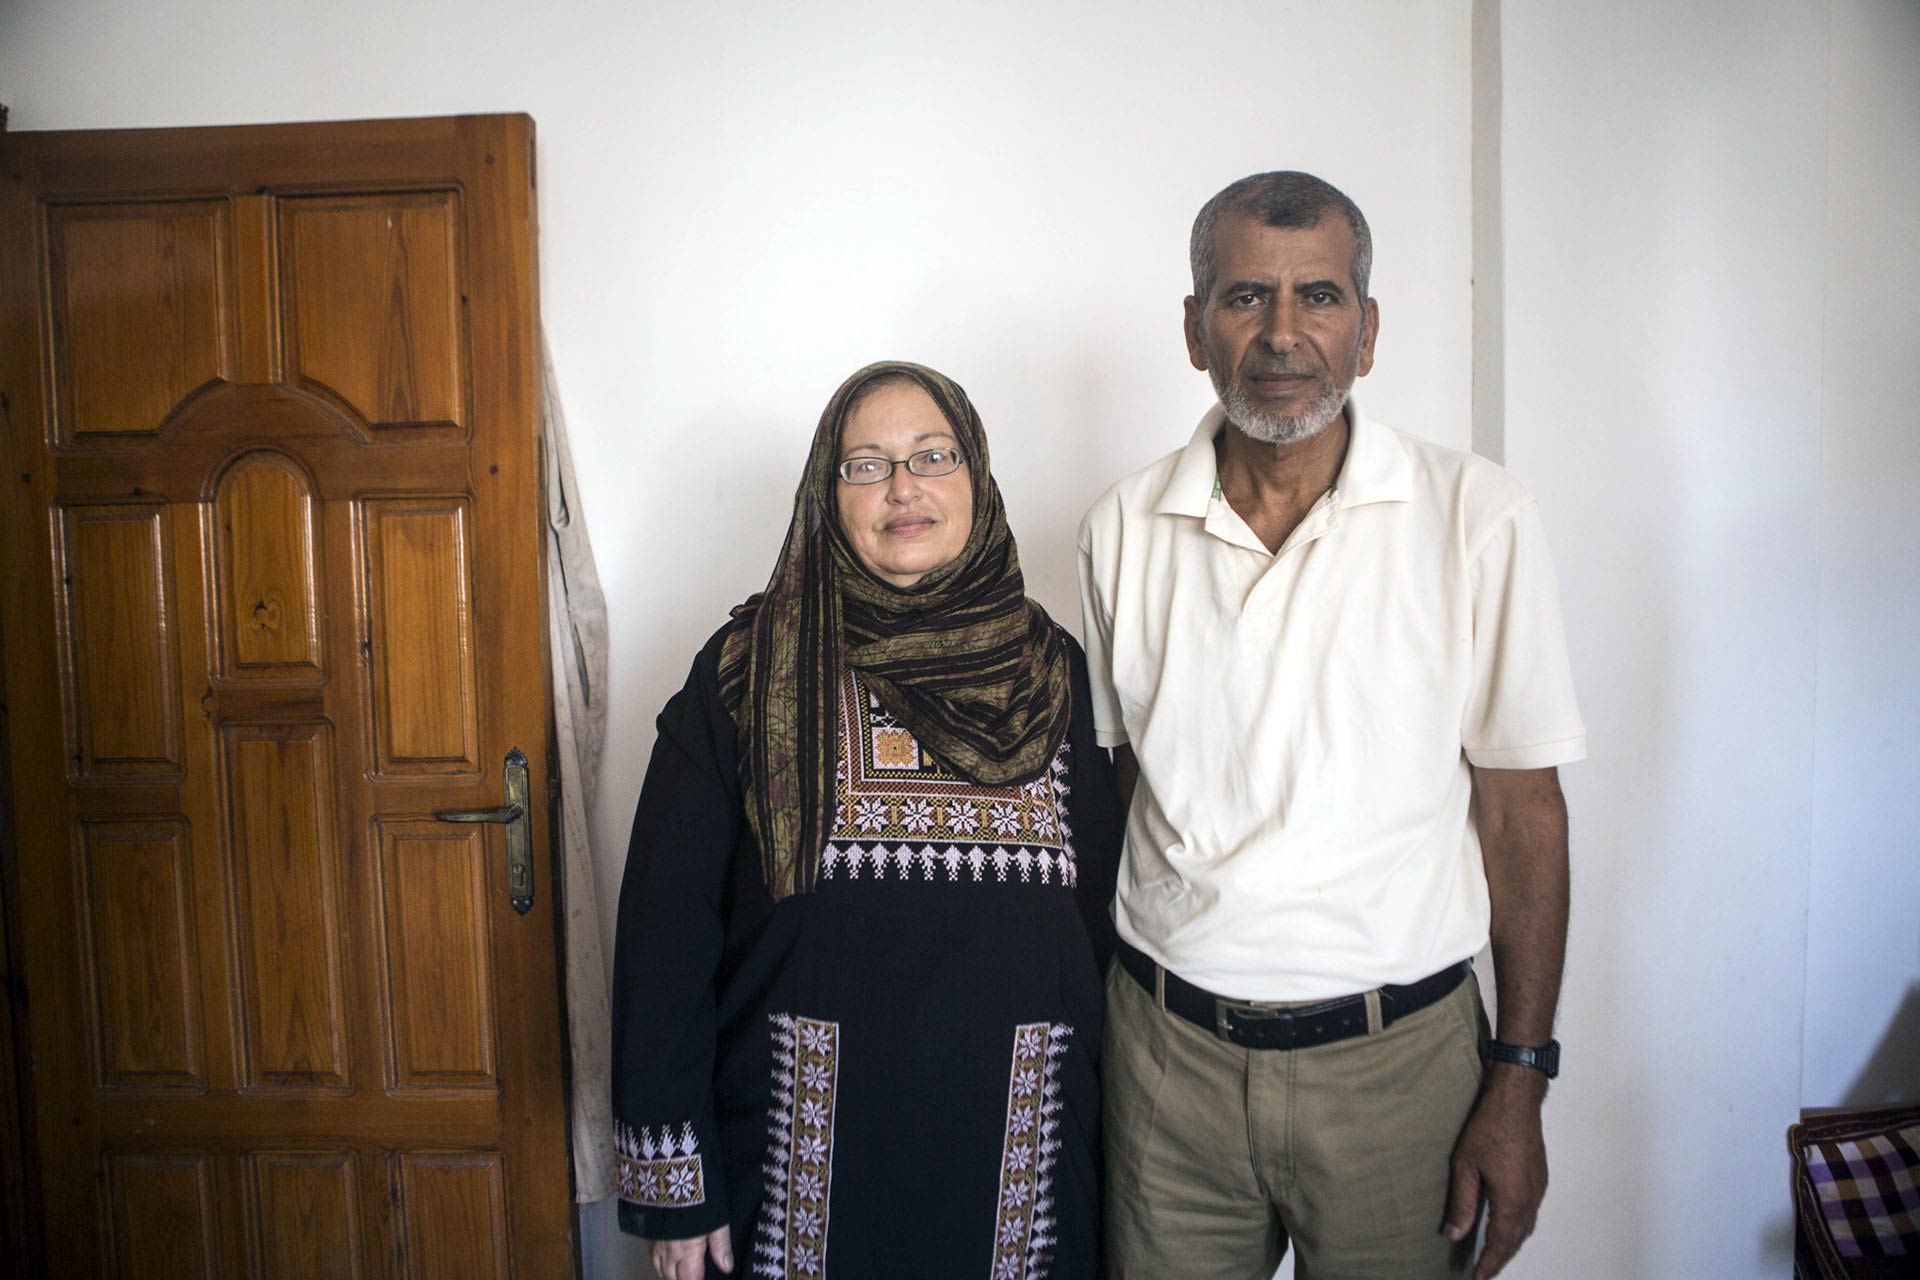 Both Buseina and Mustafa held on to their usual daily habits throughout the Israeli offensive. Buseina would get up before the morning prayer to make tea, and Mustafa would join her in the kitchen soon after.
